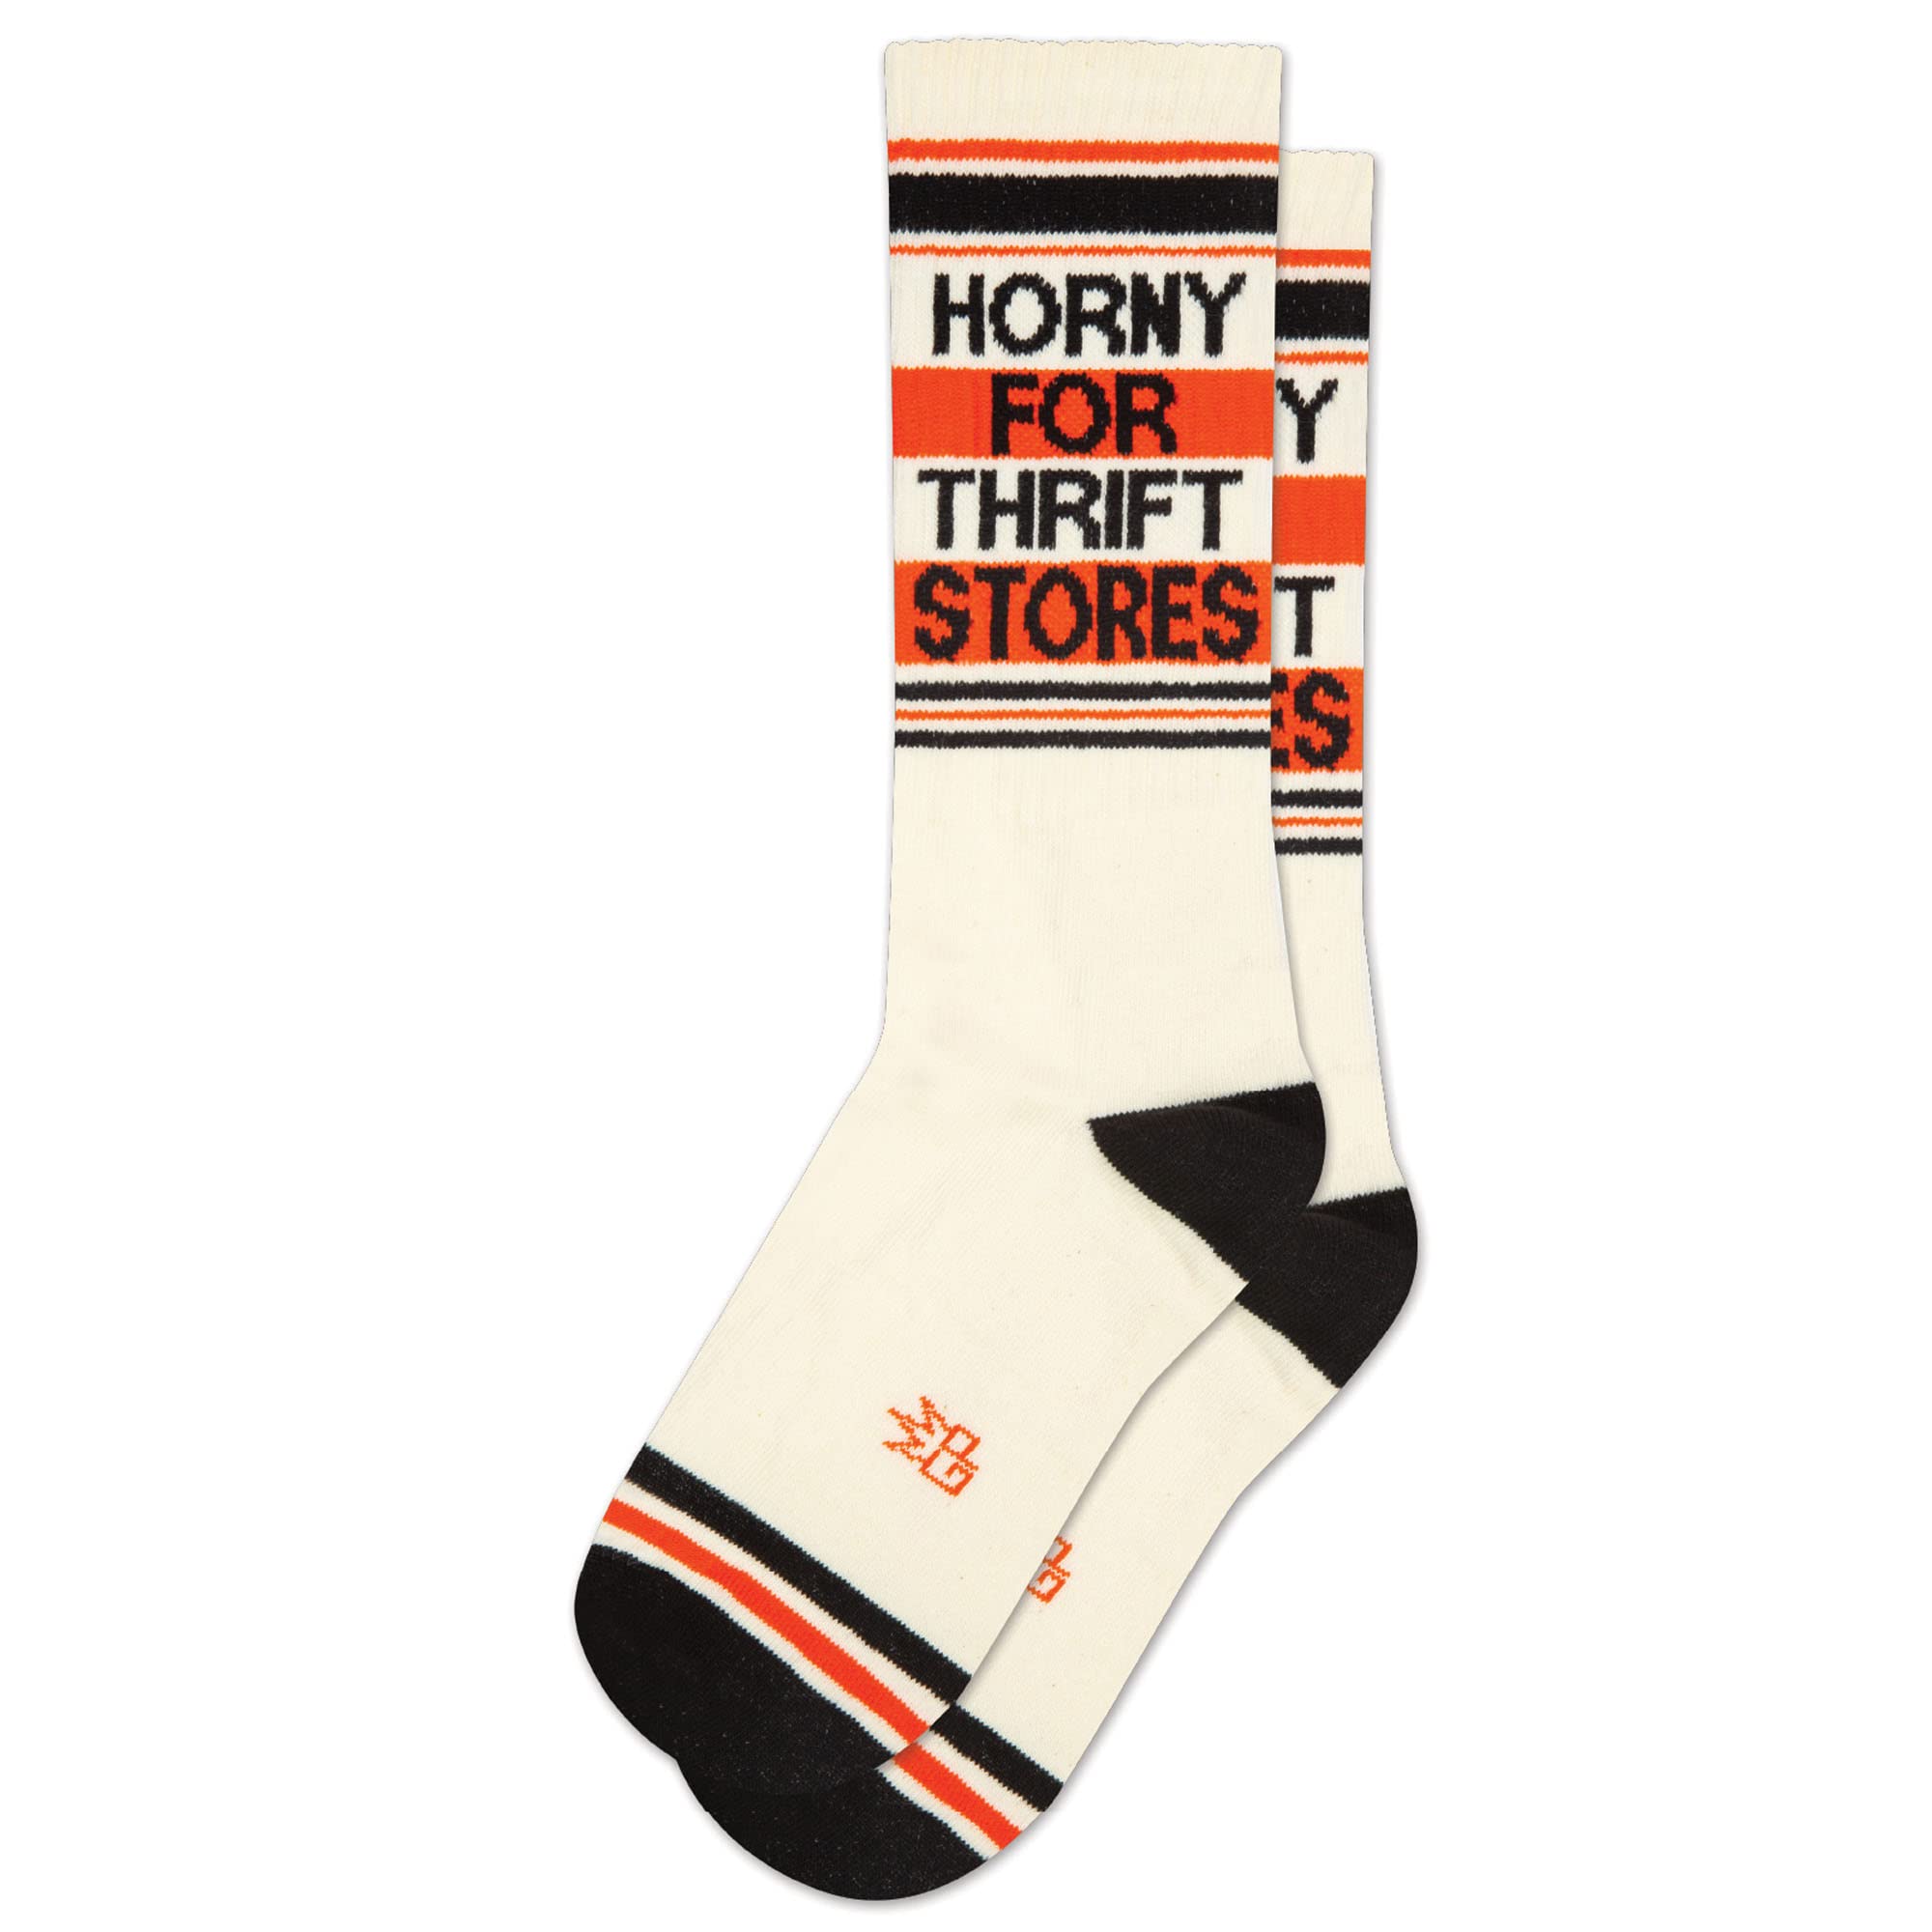 Gumball Poodle HORNY FOR THRIFT STORES Unisex Crew Socks (Made in the USA)